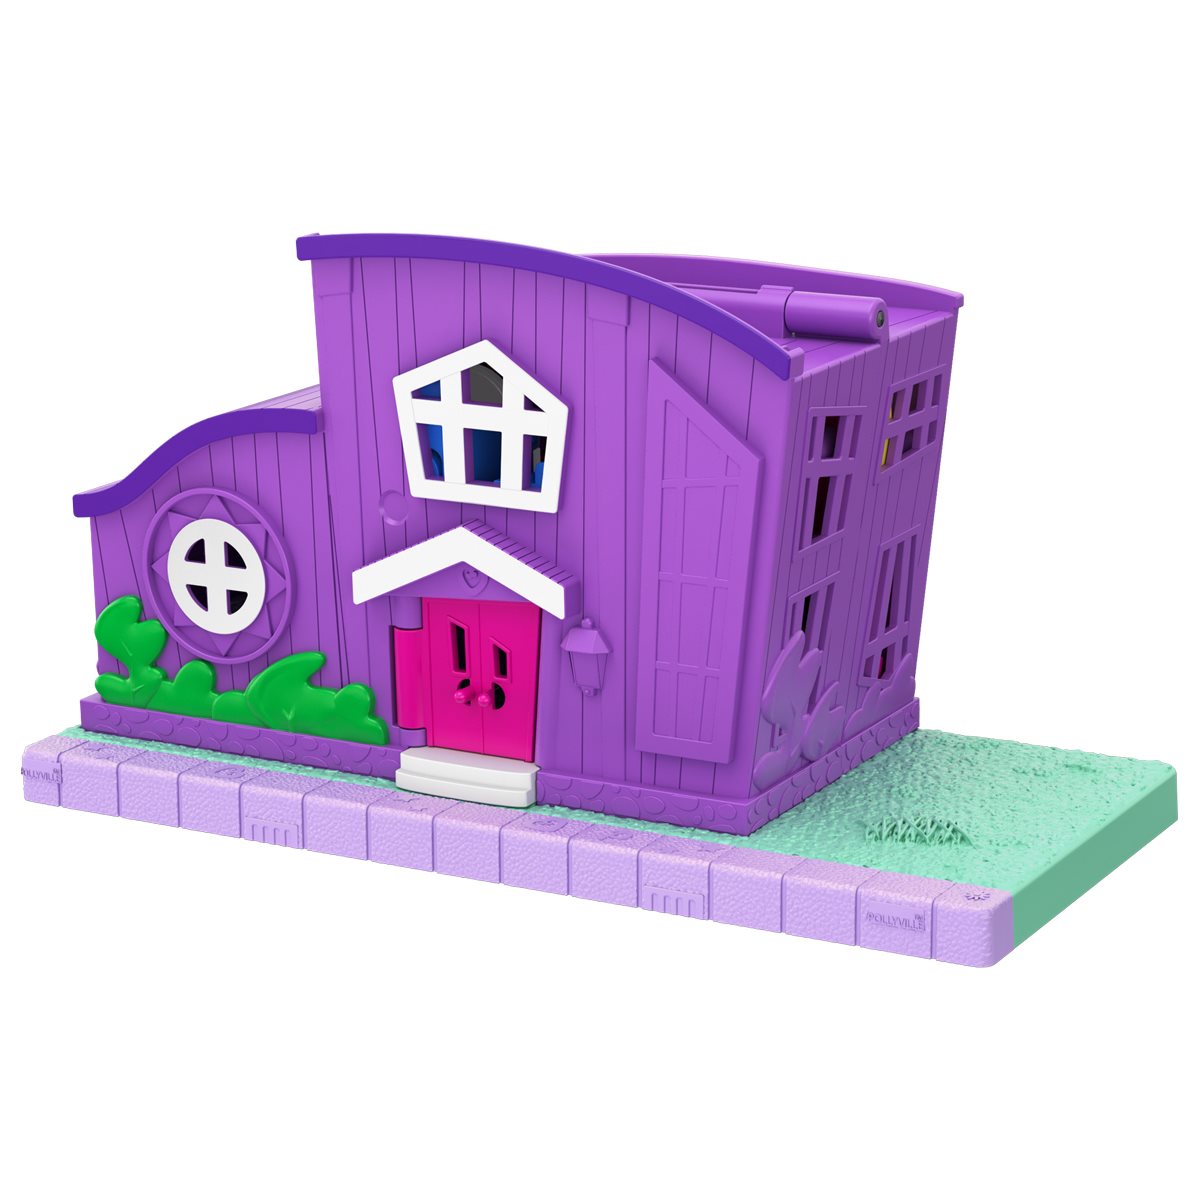 Polly Pocket Pollyville Diner Set with 4 Floors 2 Dolls & 5 Accessories 